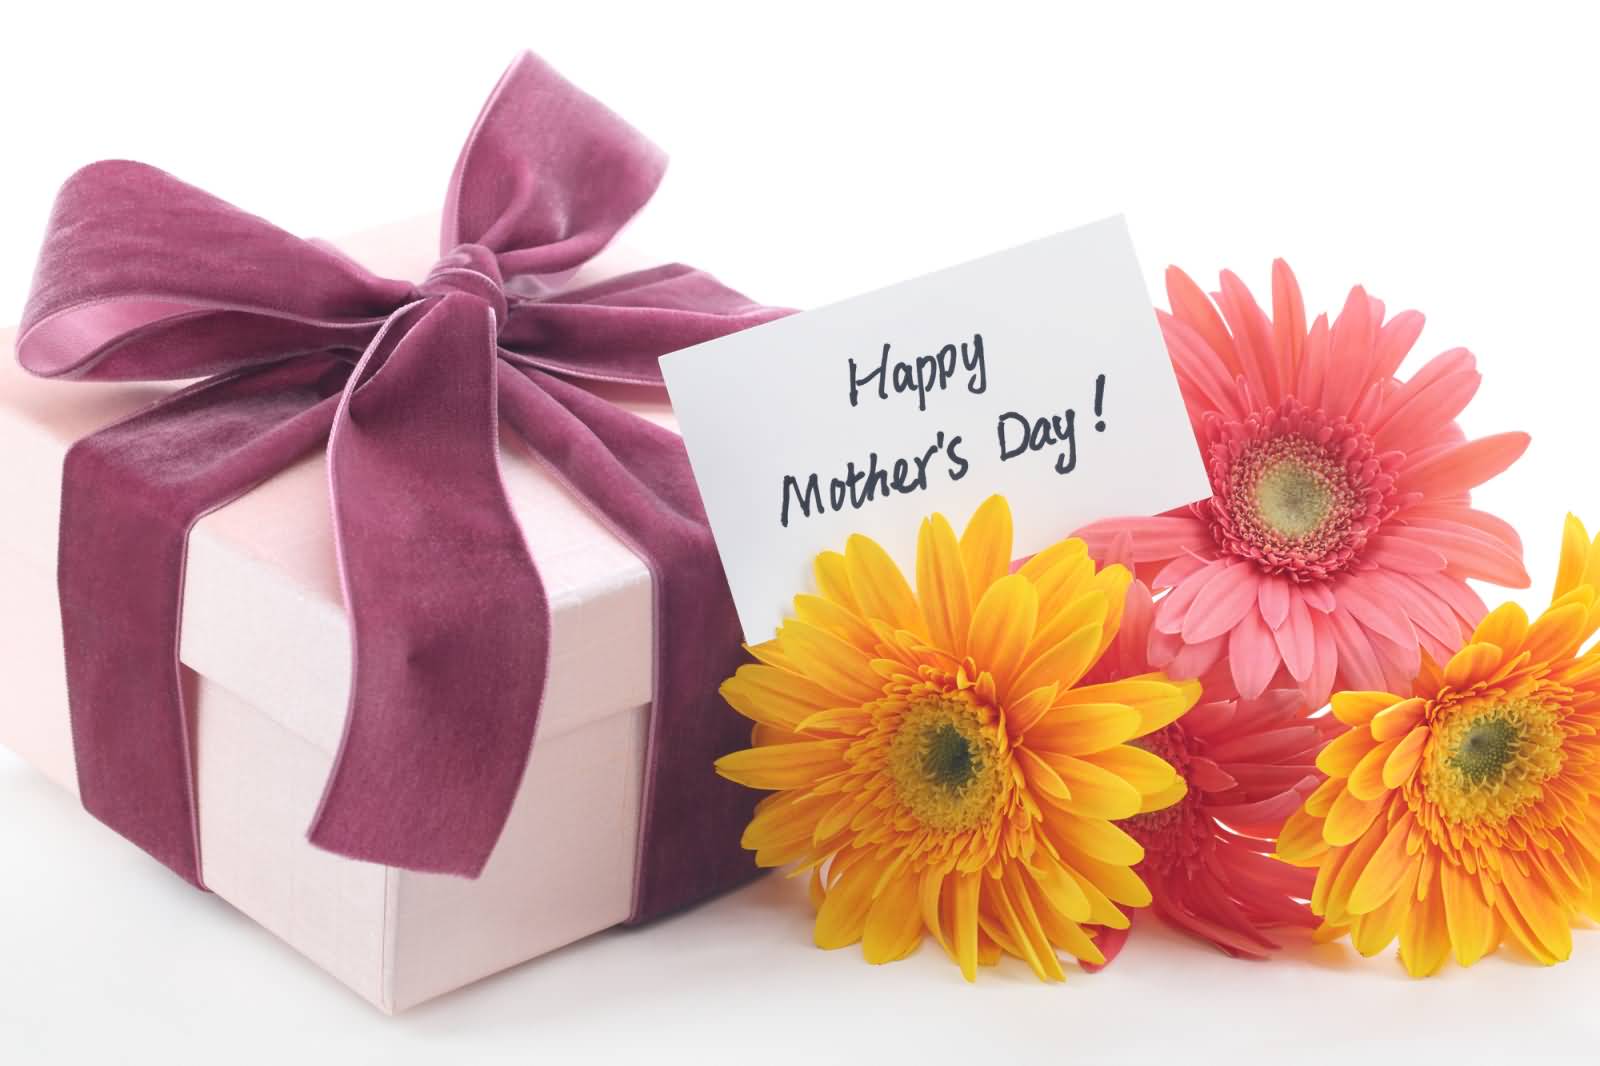 Happy Mother’s Day Card With Gift Box And Flowers